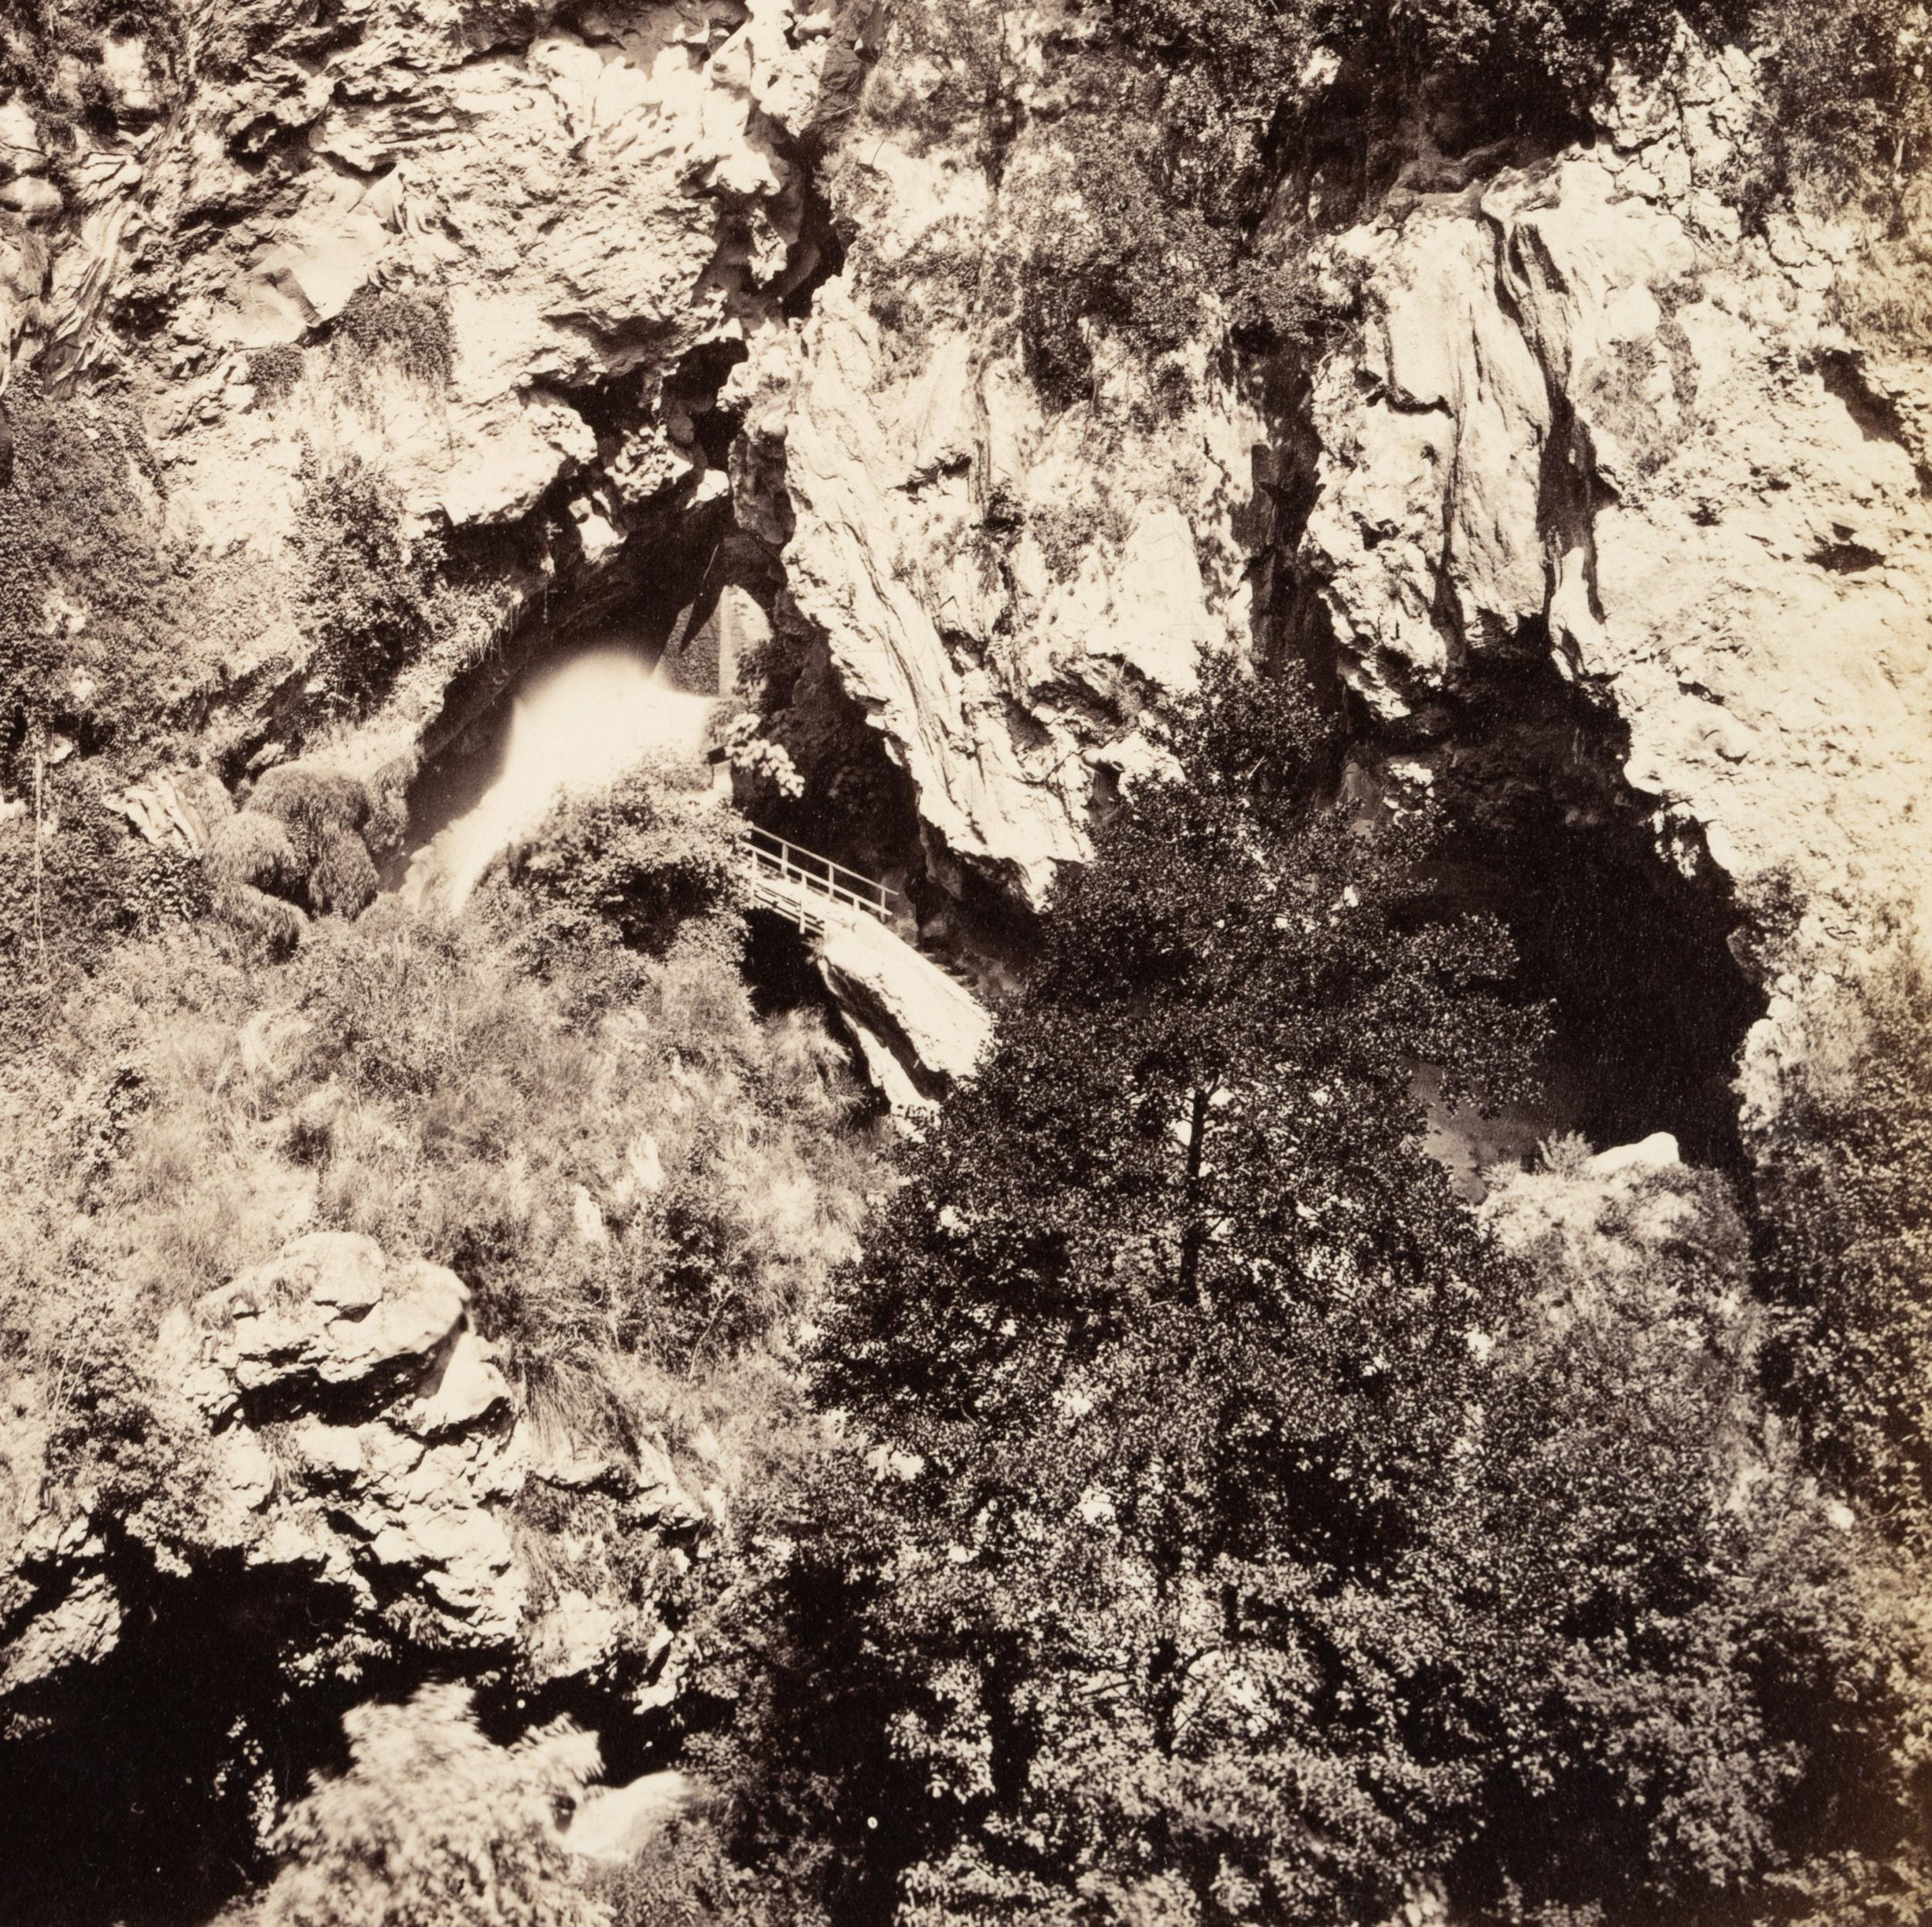 Fratelli Alinari (19th century) Circle: The waterfalls at Tivoli View of the waterfall, gorges and up to the Temple of Vesta from the opposite side, c. 1880, albumen paper print

Technique: albumen paper print, mounted on Cardboard

Inscription: At